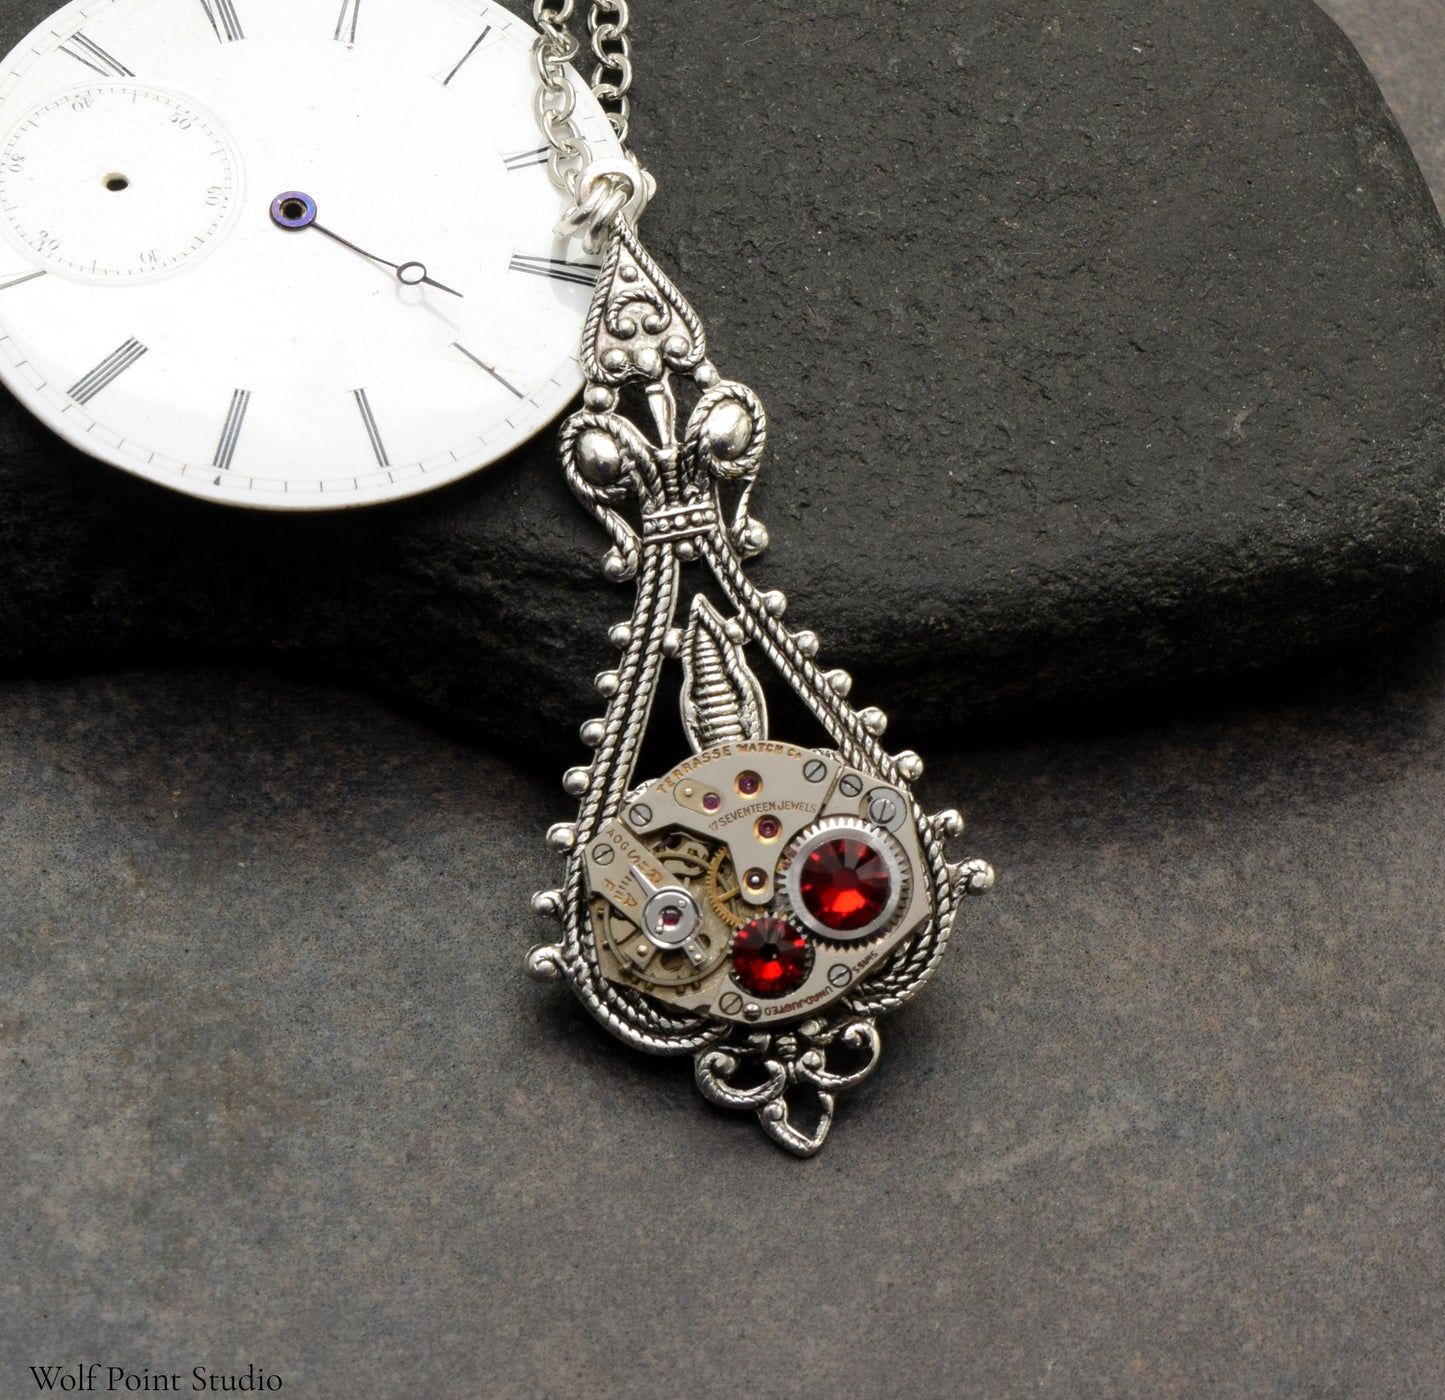 Personalized Steampunk Jewelry Necklace in Antique Silver, Customize | Choose Your Colors, Victorian Vintage Style Steam Punk